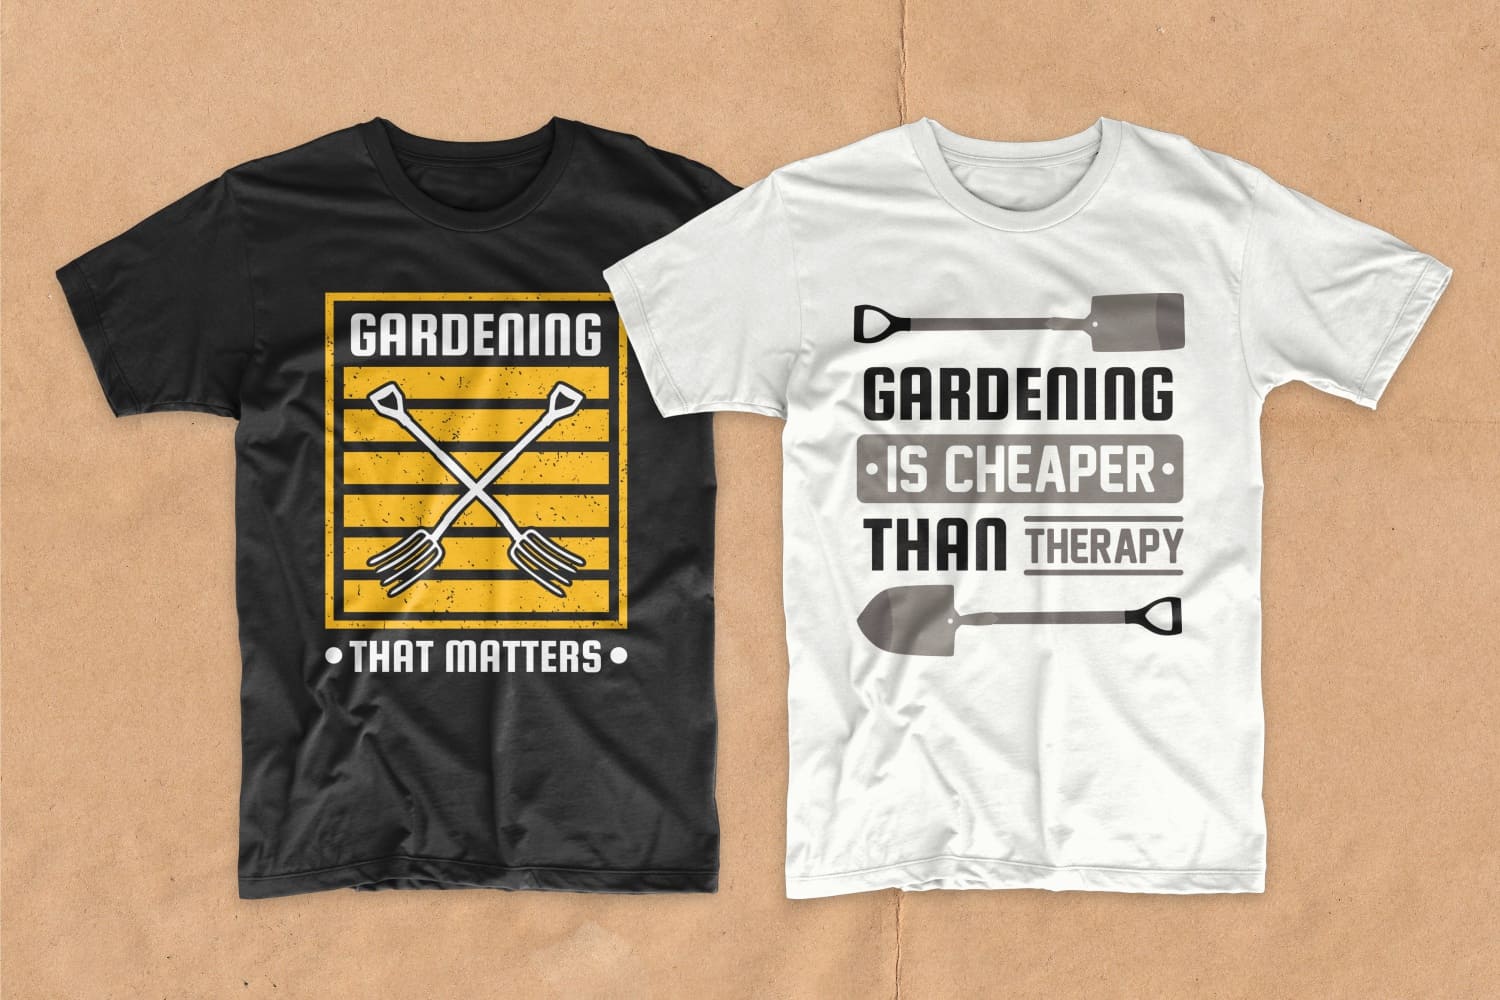 Black and white T-shirts with beautiful messages about the importance of gardening.